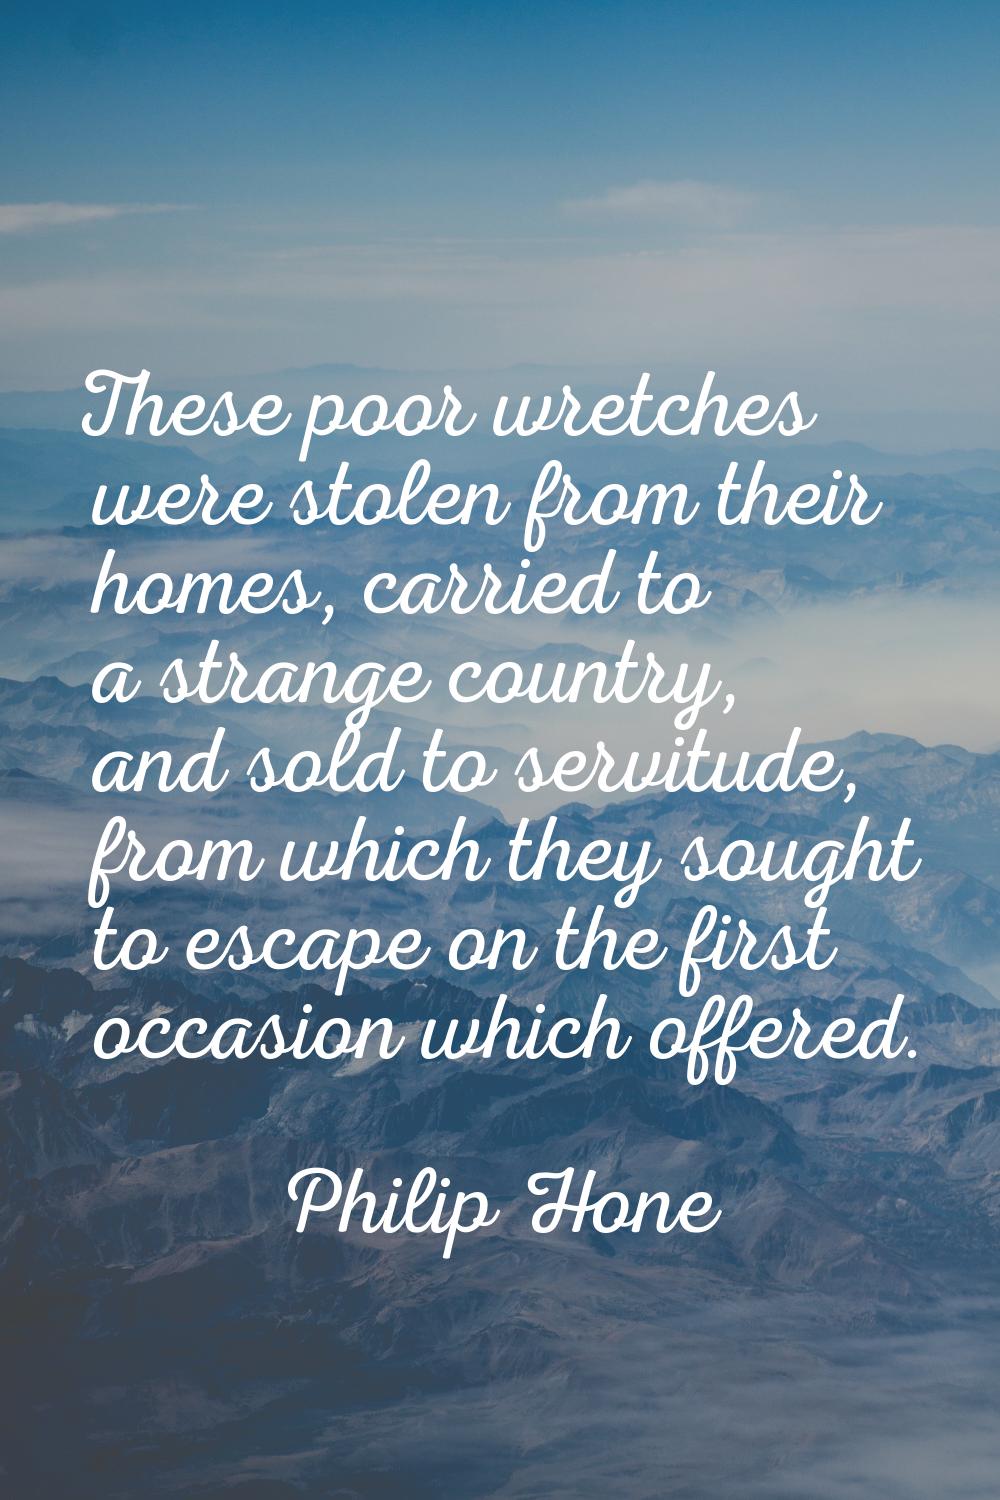 These poor wretches were stolen from their homes, carried to a strange country, and sold to servitu